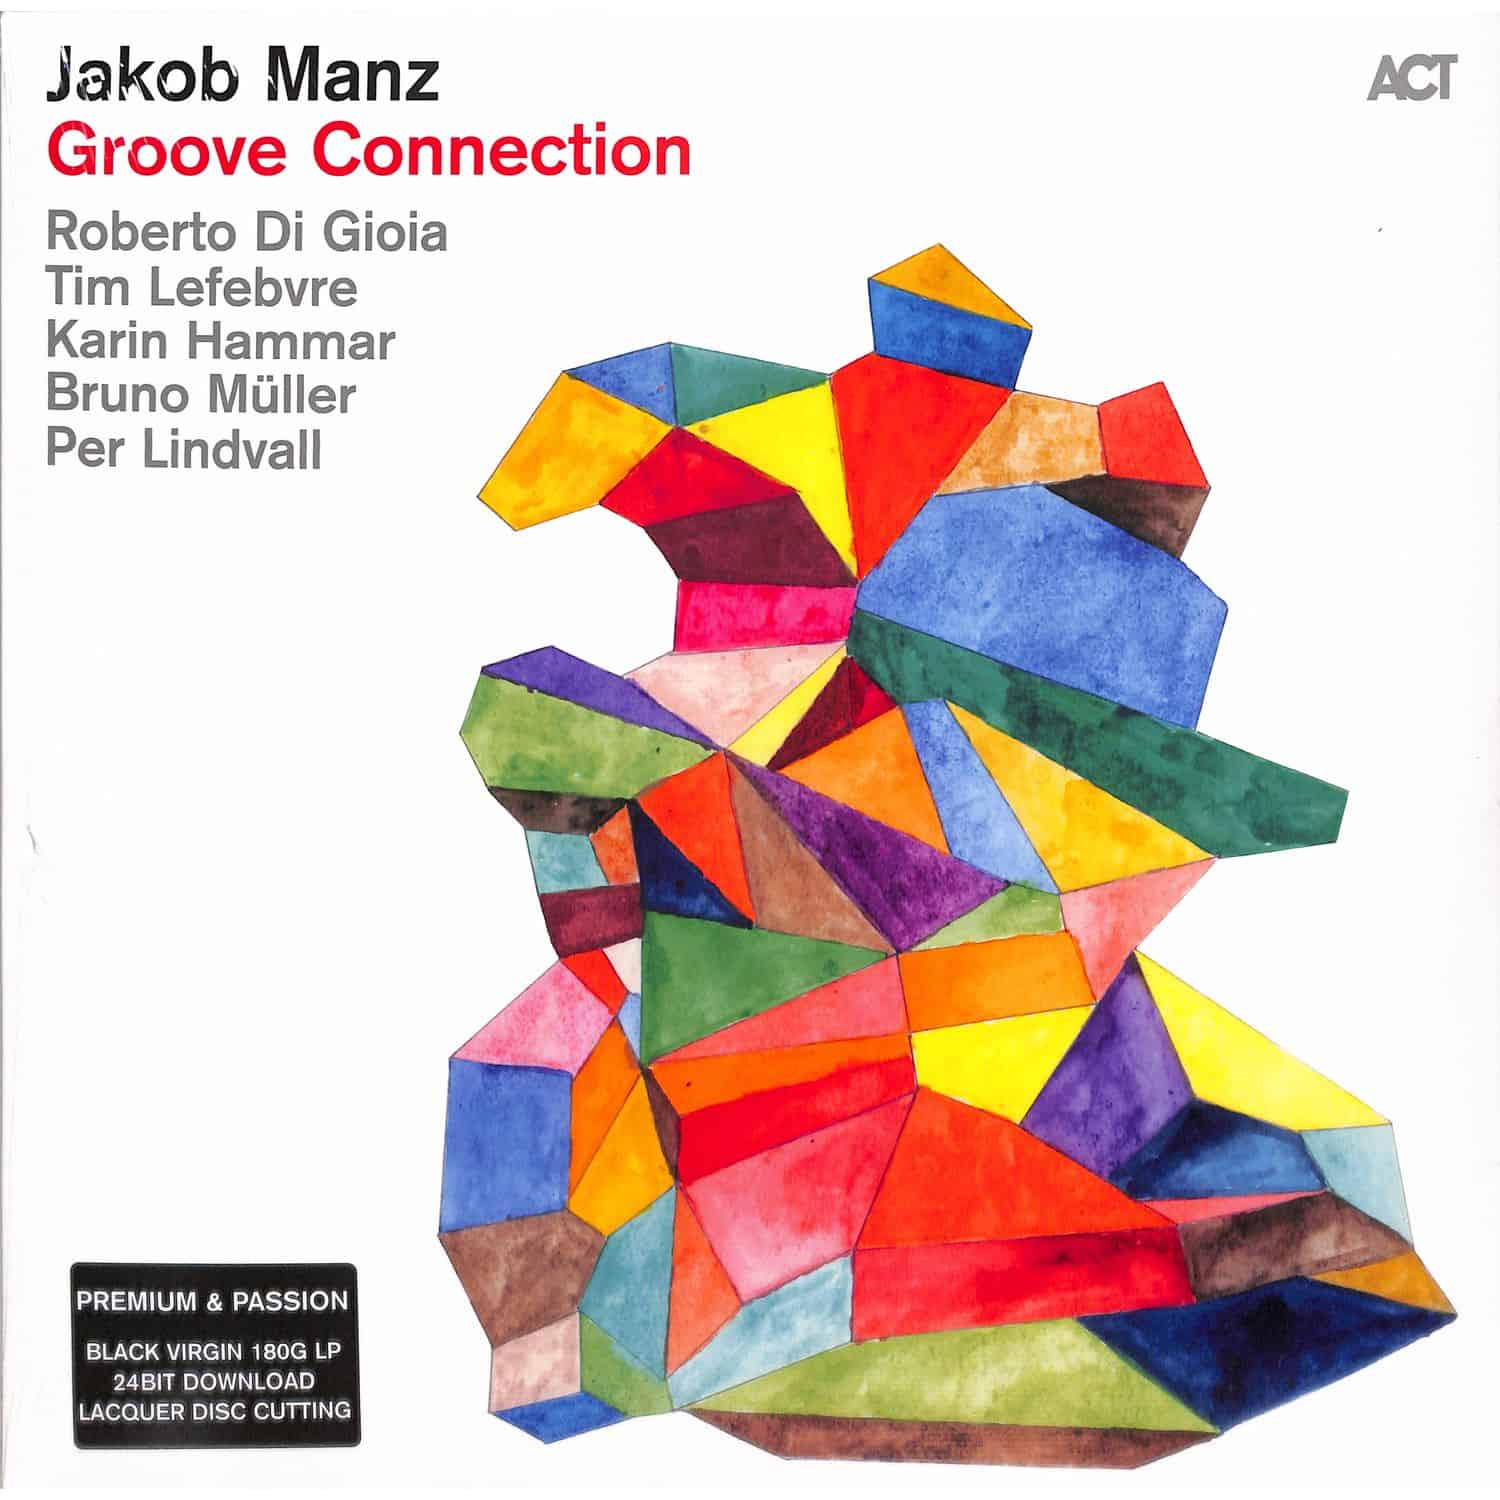  Jakob Manz - GROOVE CONNECTION 